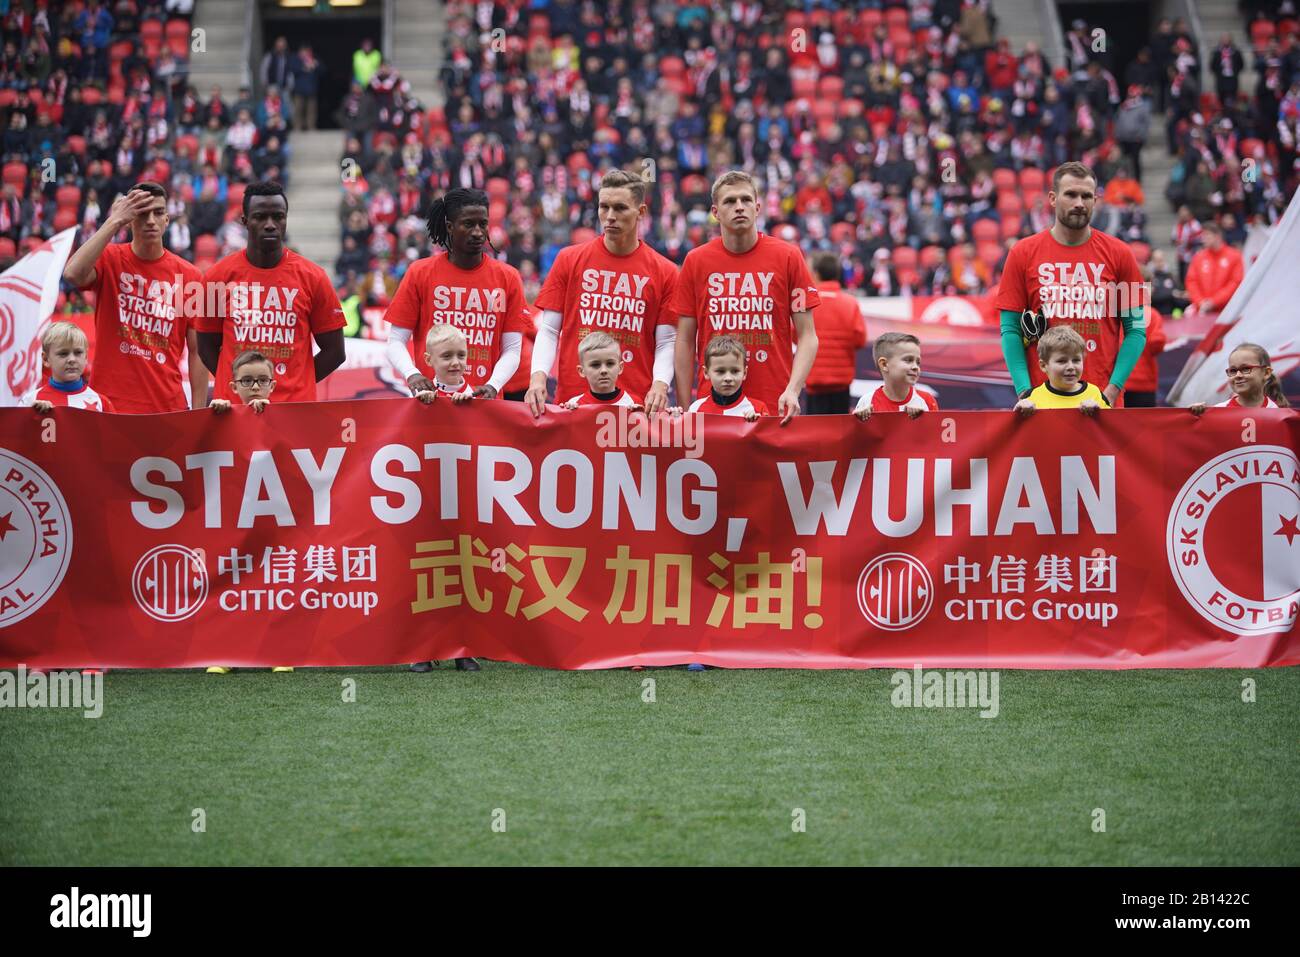 Prague, Czech Republic. 22nd Feb, 2020. The line-up players of SK Slavia Praha wearing jerseys with the message 'Stay strong Wuhan' in English and Mandarin pose prior to their Czech Liga match against SFC Opava in Prague, the Czech Republic, Feb. 22, 2020. Czech top-flight team SK Slavia Praha expressed solidarity with China in fighting against the novel coronavirus during their 2-0 home win over SFC Opava on Saturday. Credit: Martin Mach/Xinhua/Alamy Live News Stock Photo